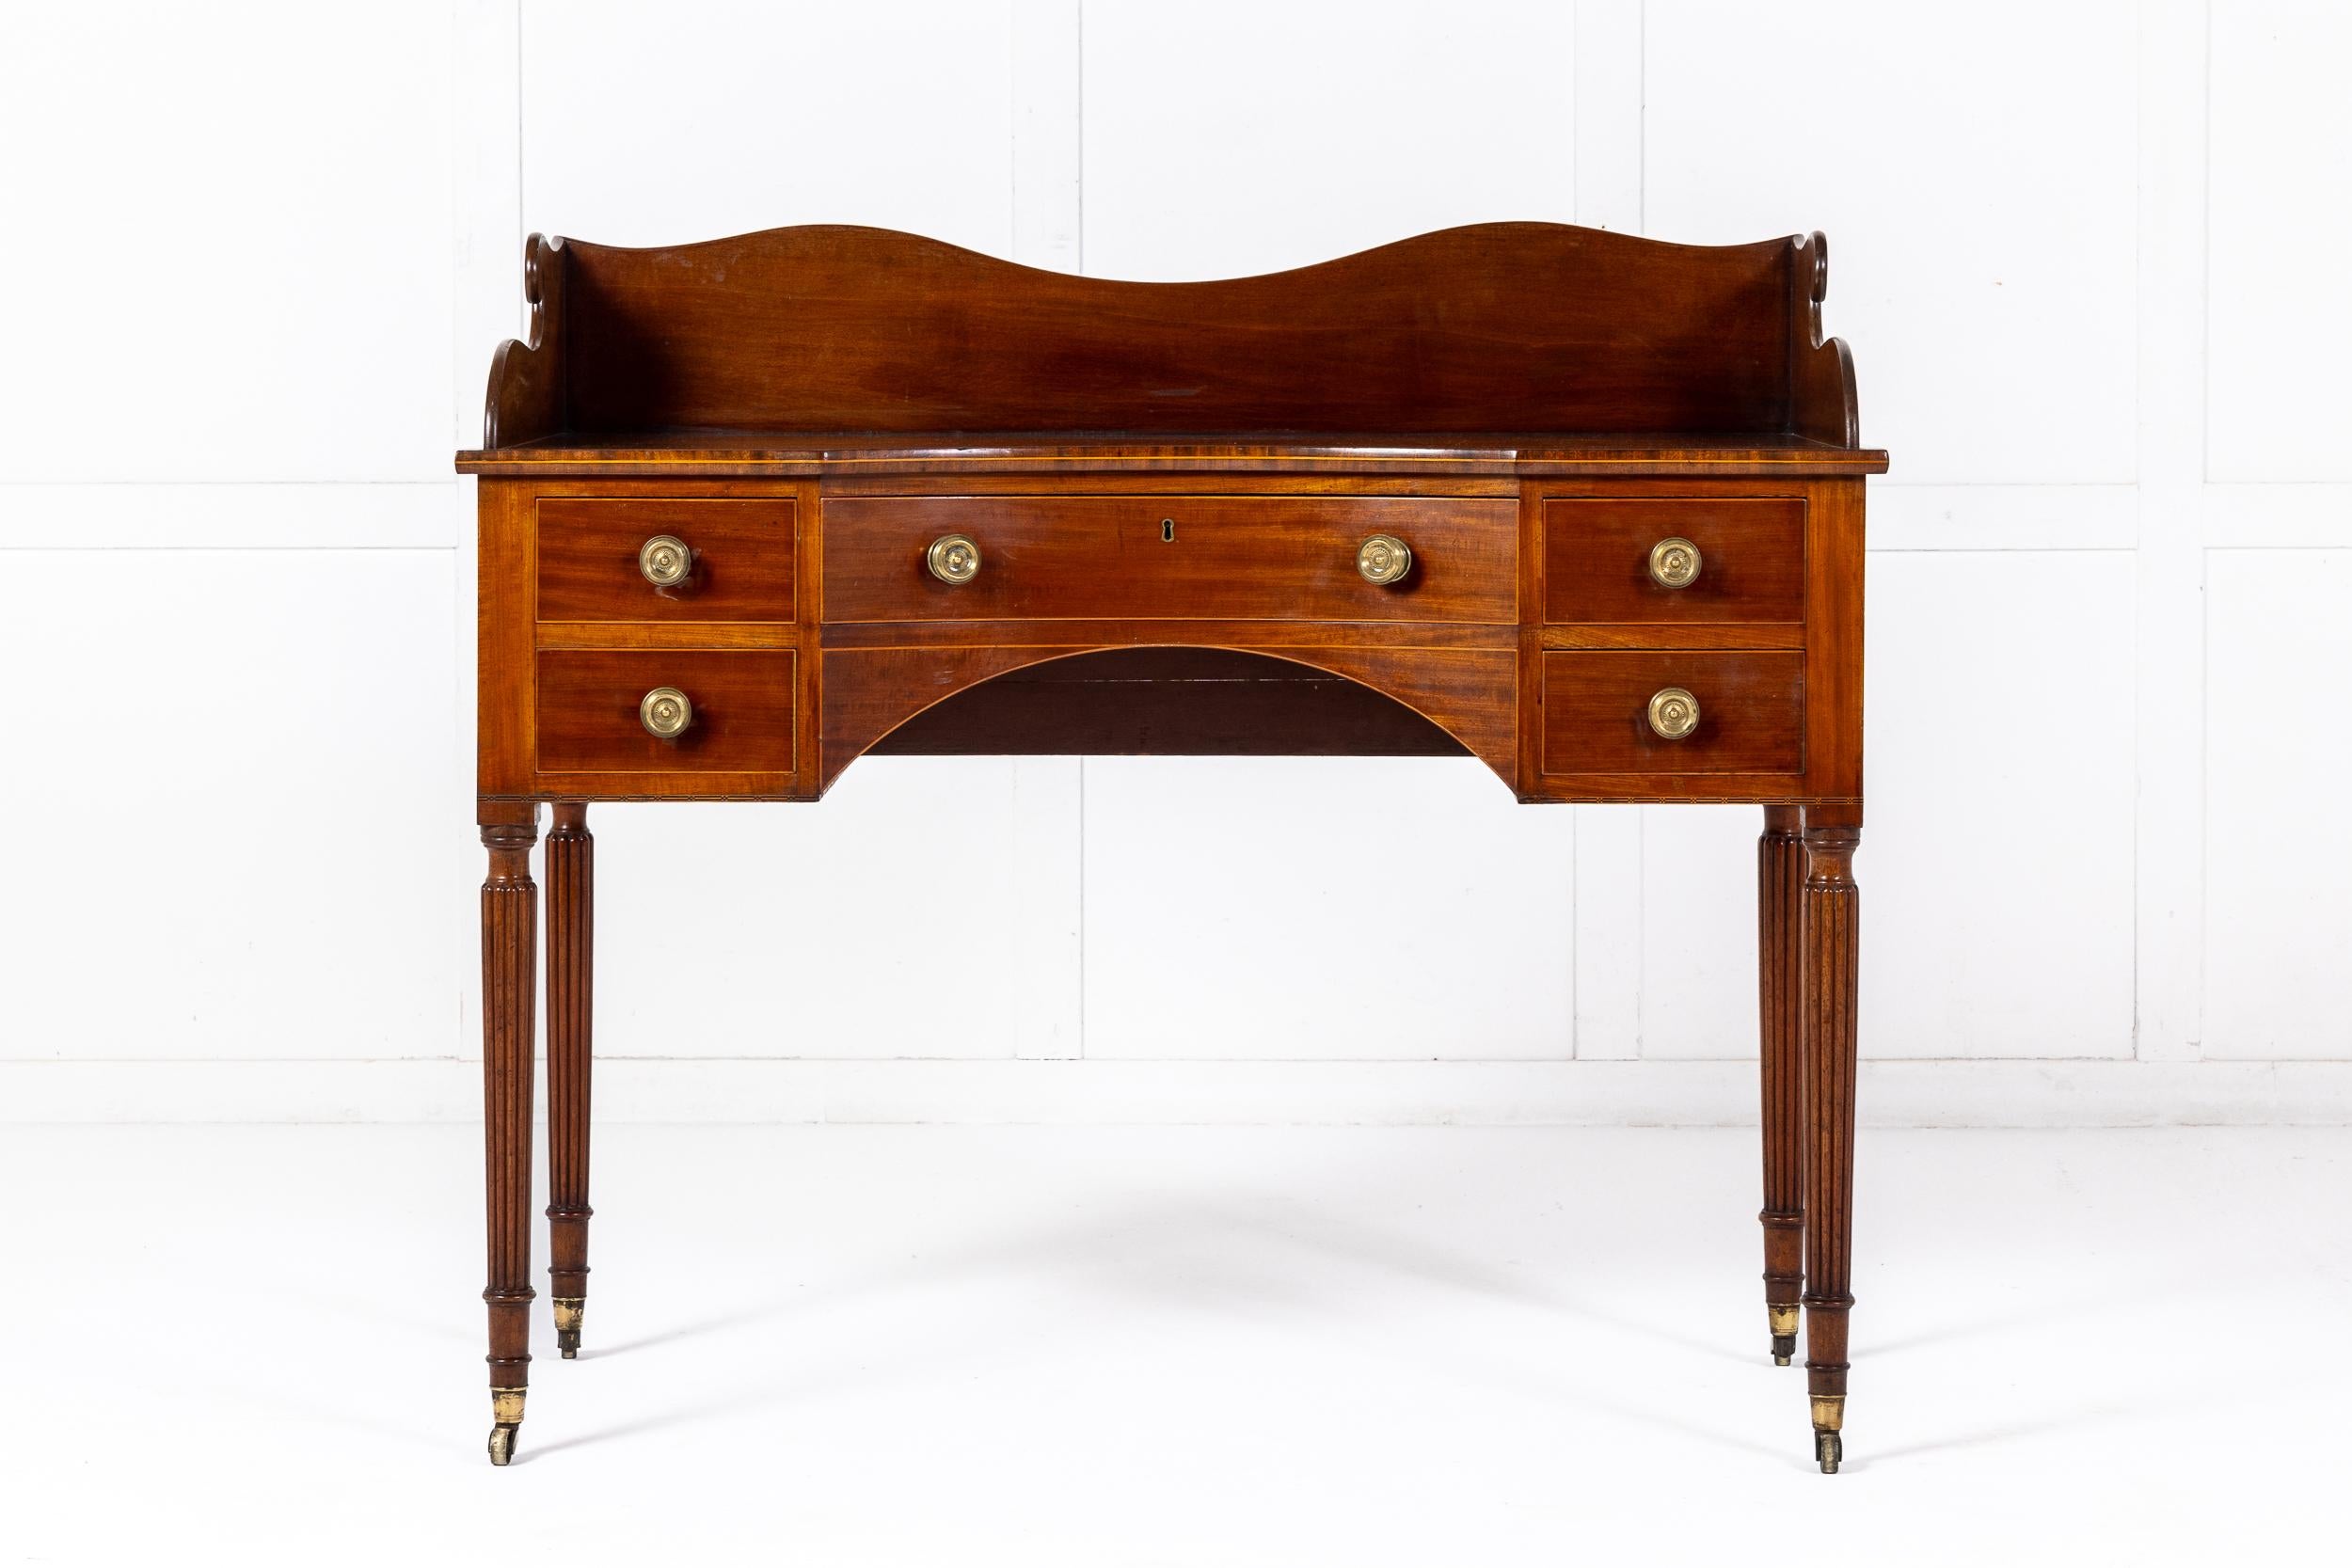 A Fine Late Regency Mahogany Dressing or Writing Table in the Manner of Gillows of Lancaster.

This fine table with its shaped superstructure and concave front was originally conceived as a dressing table but today such pieces are often used as